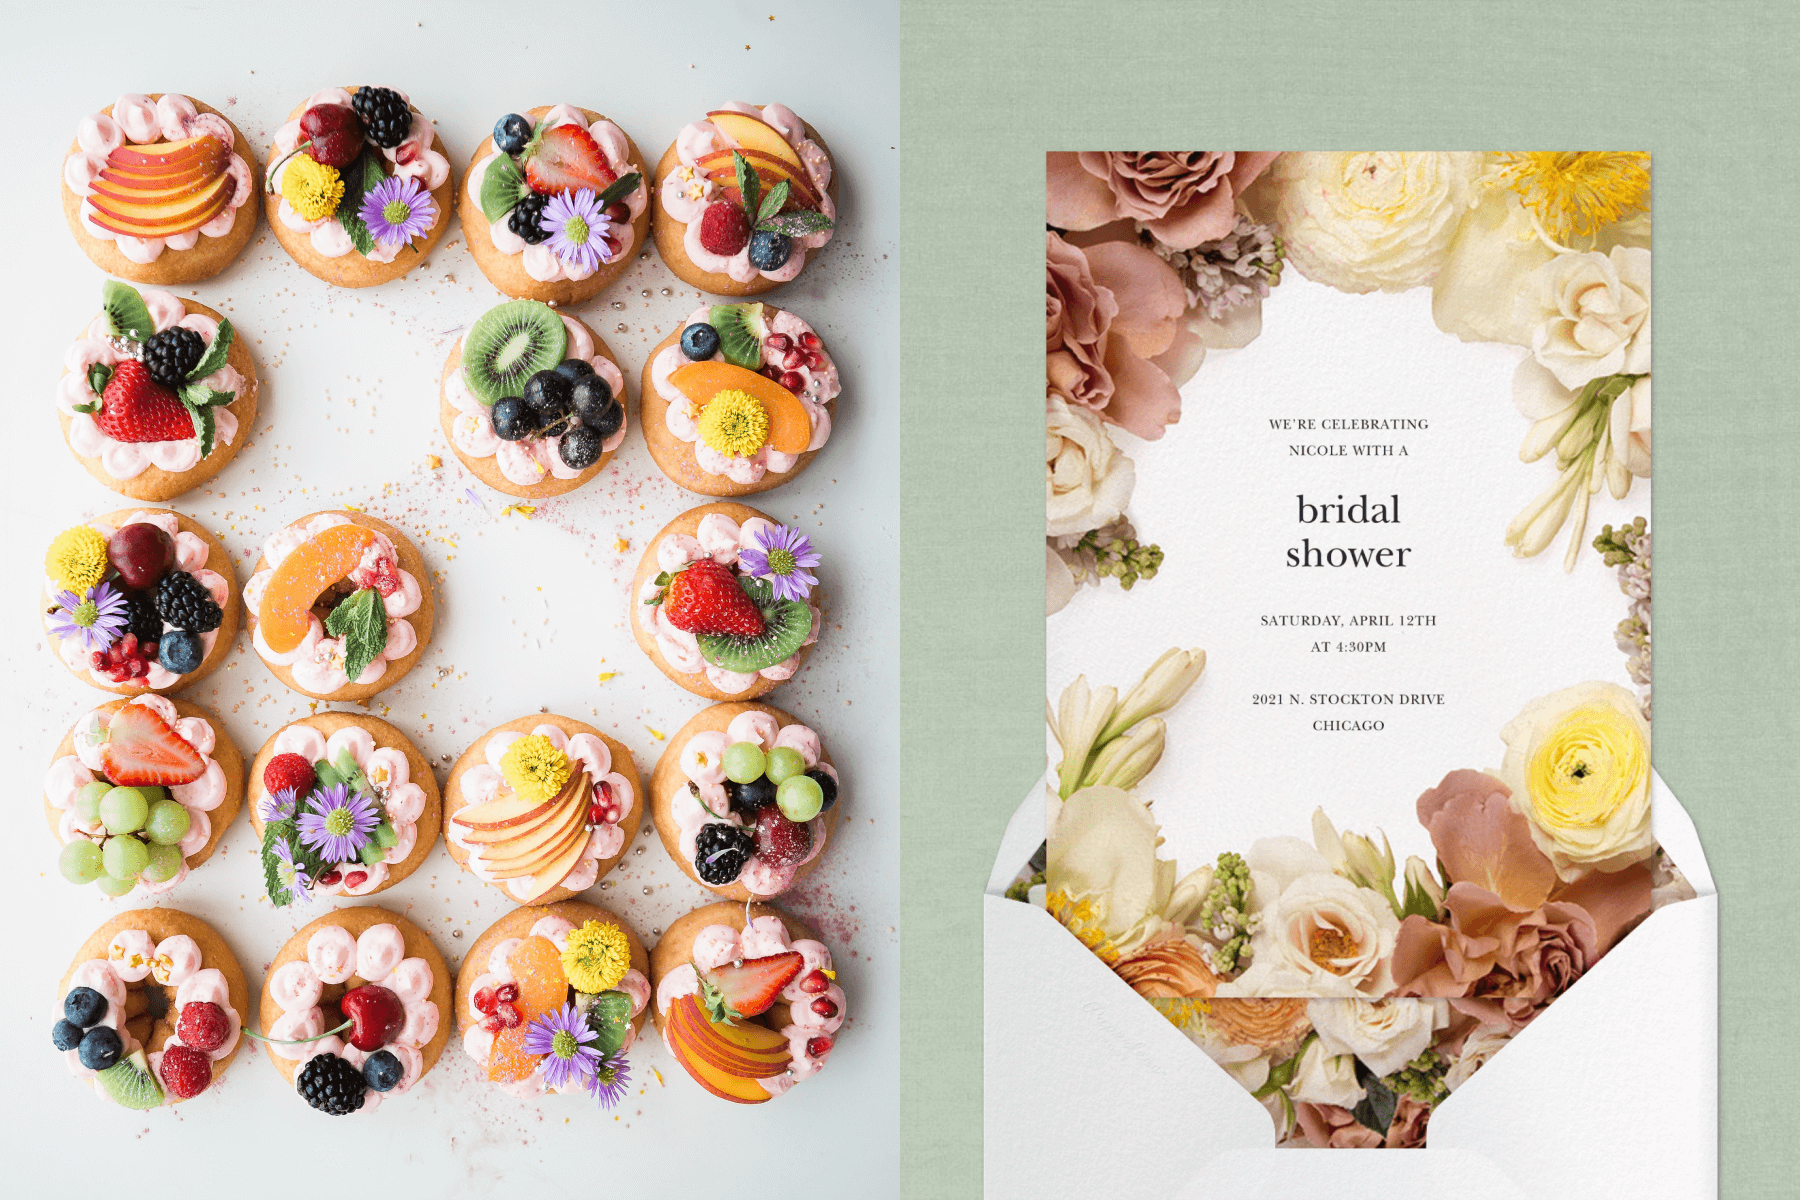 Left: Dessert doughnuts decorated with cream, fruit, and flowers. Right: A bridal shower invitation with a border of large photographed flowers.